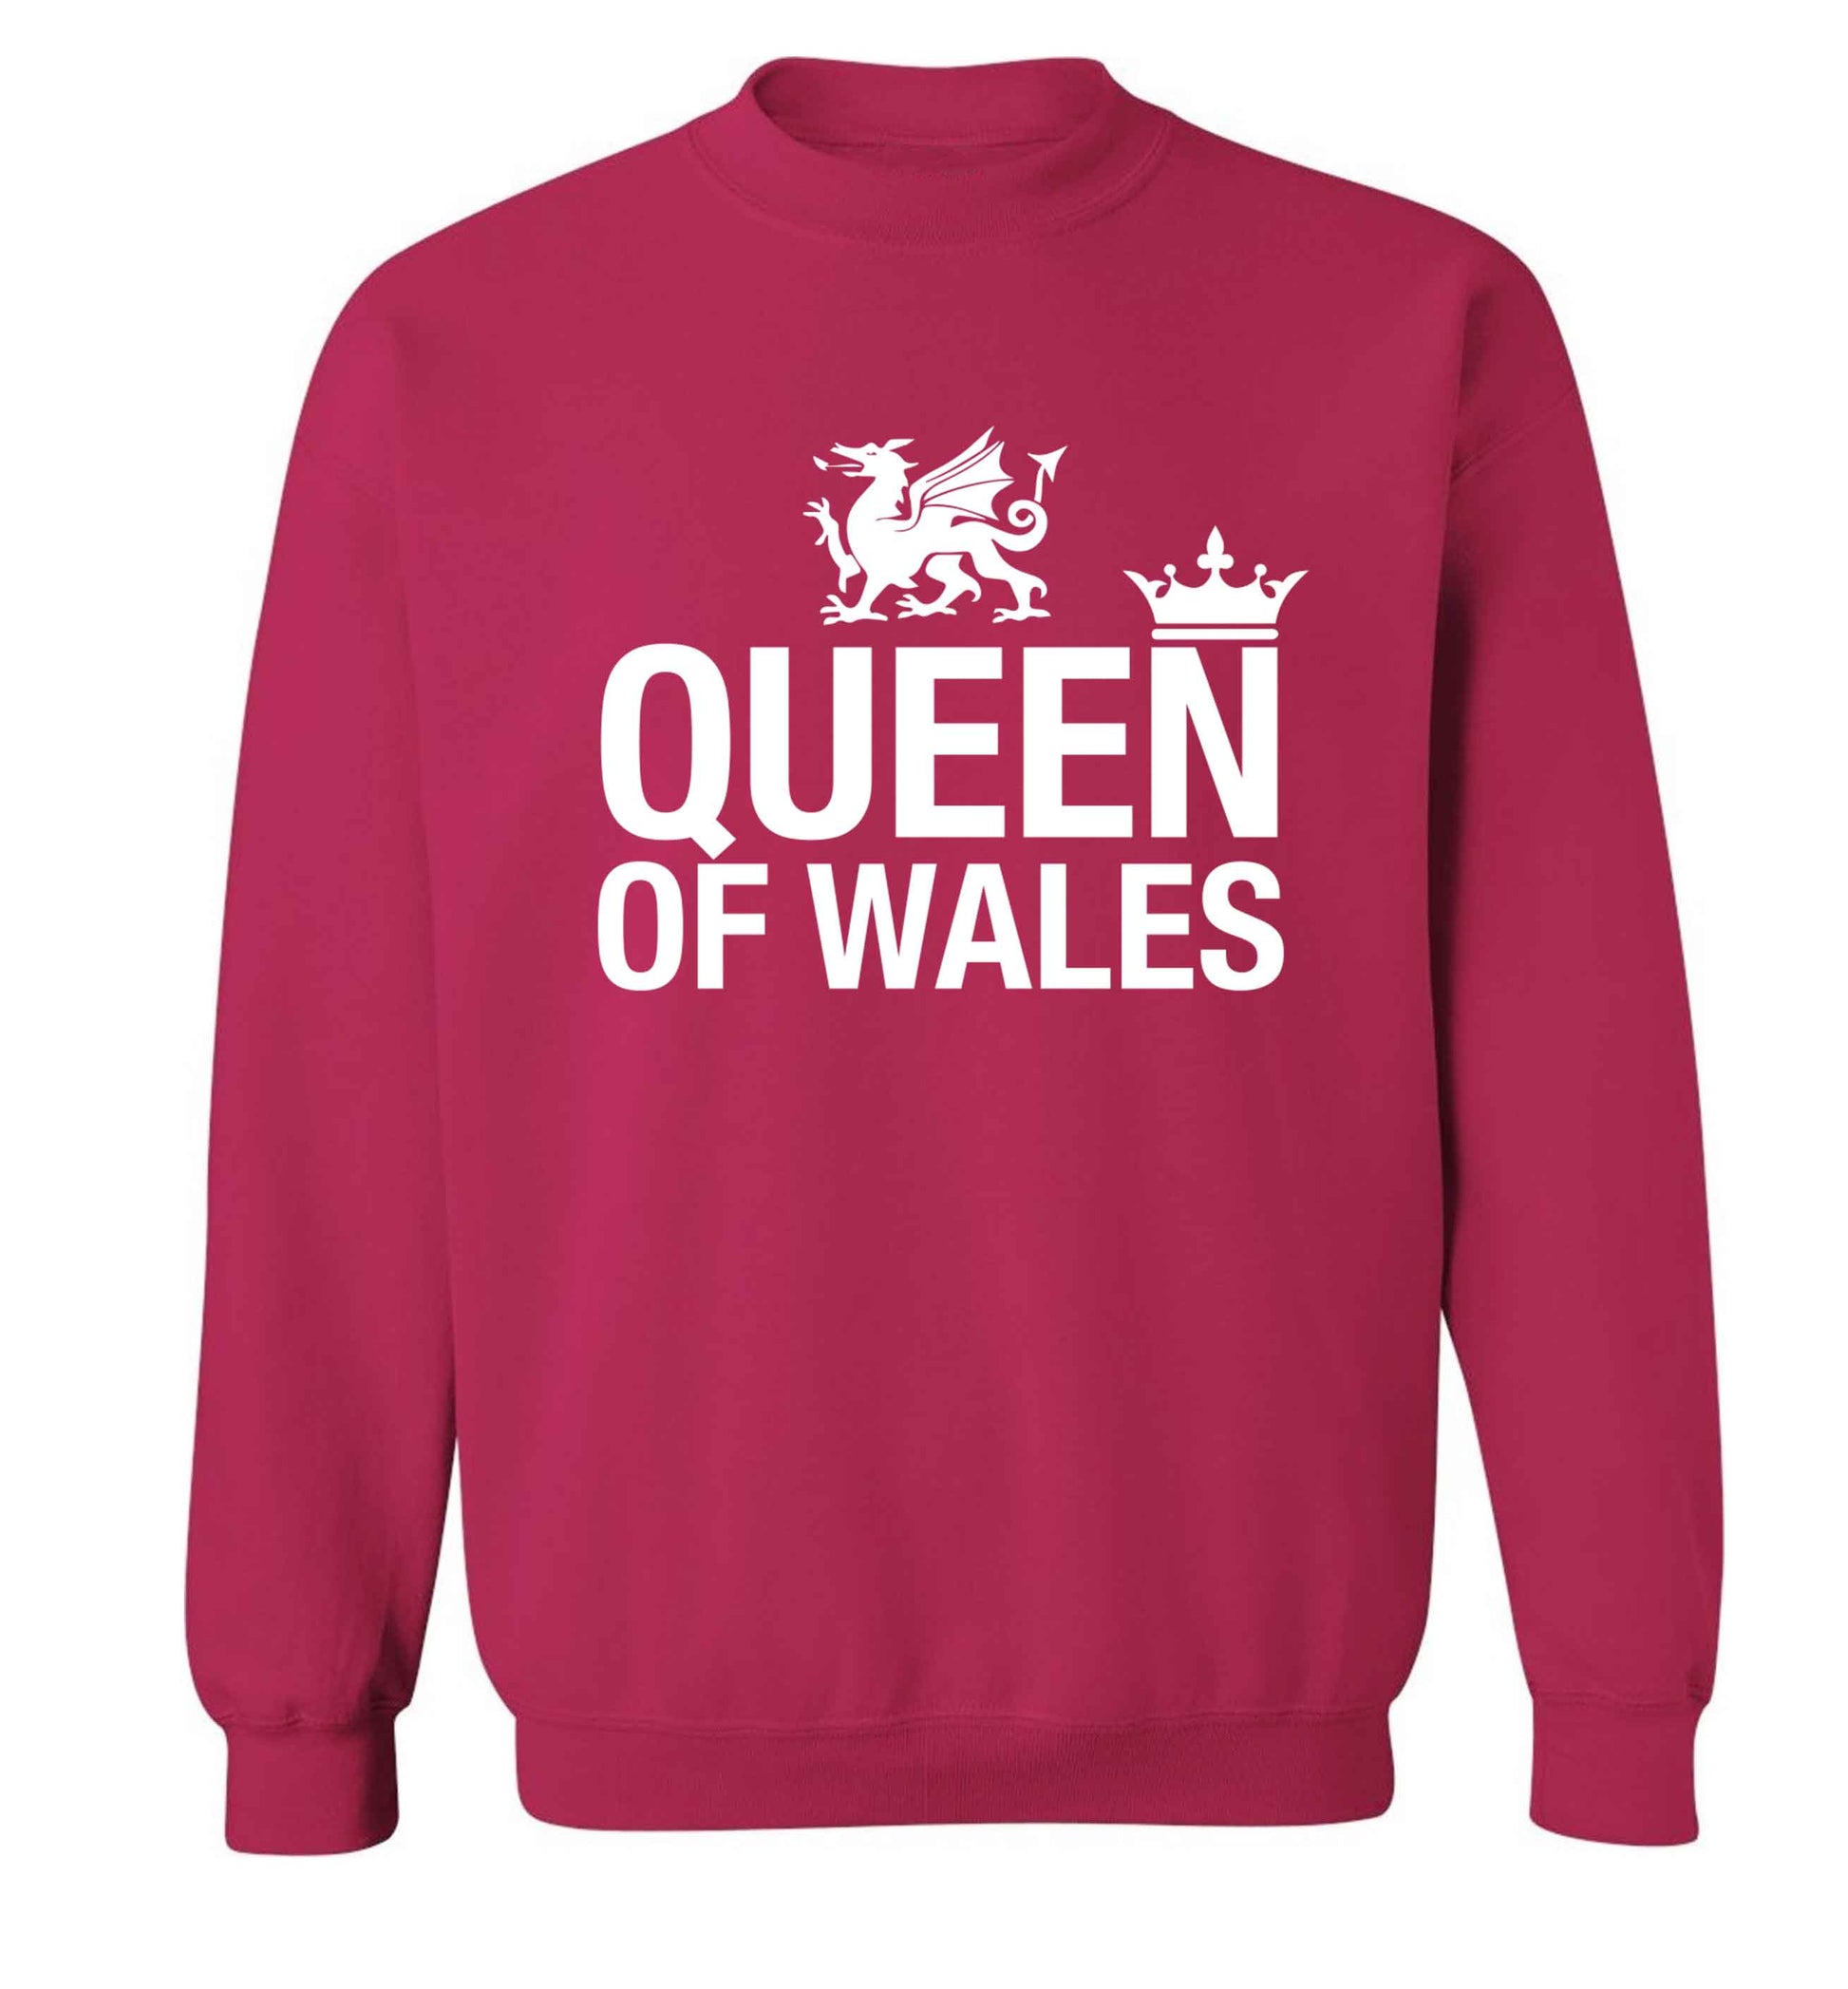 Queen of Wales Adult's unisex pink Sweater 2XL